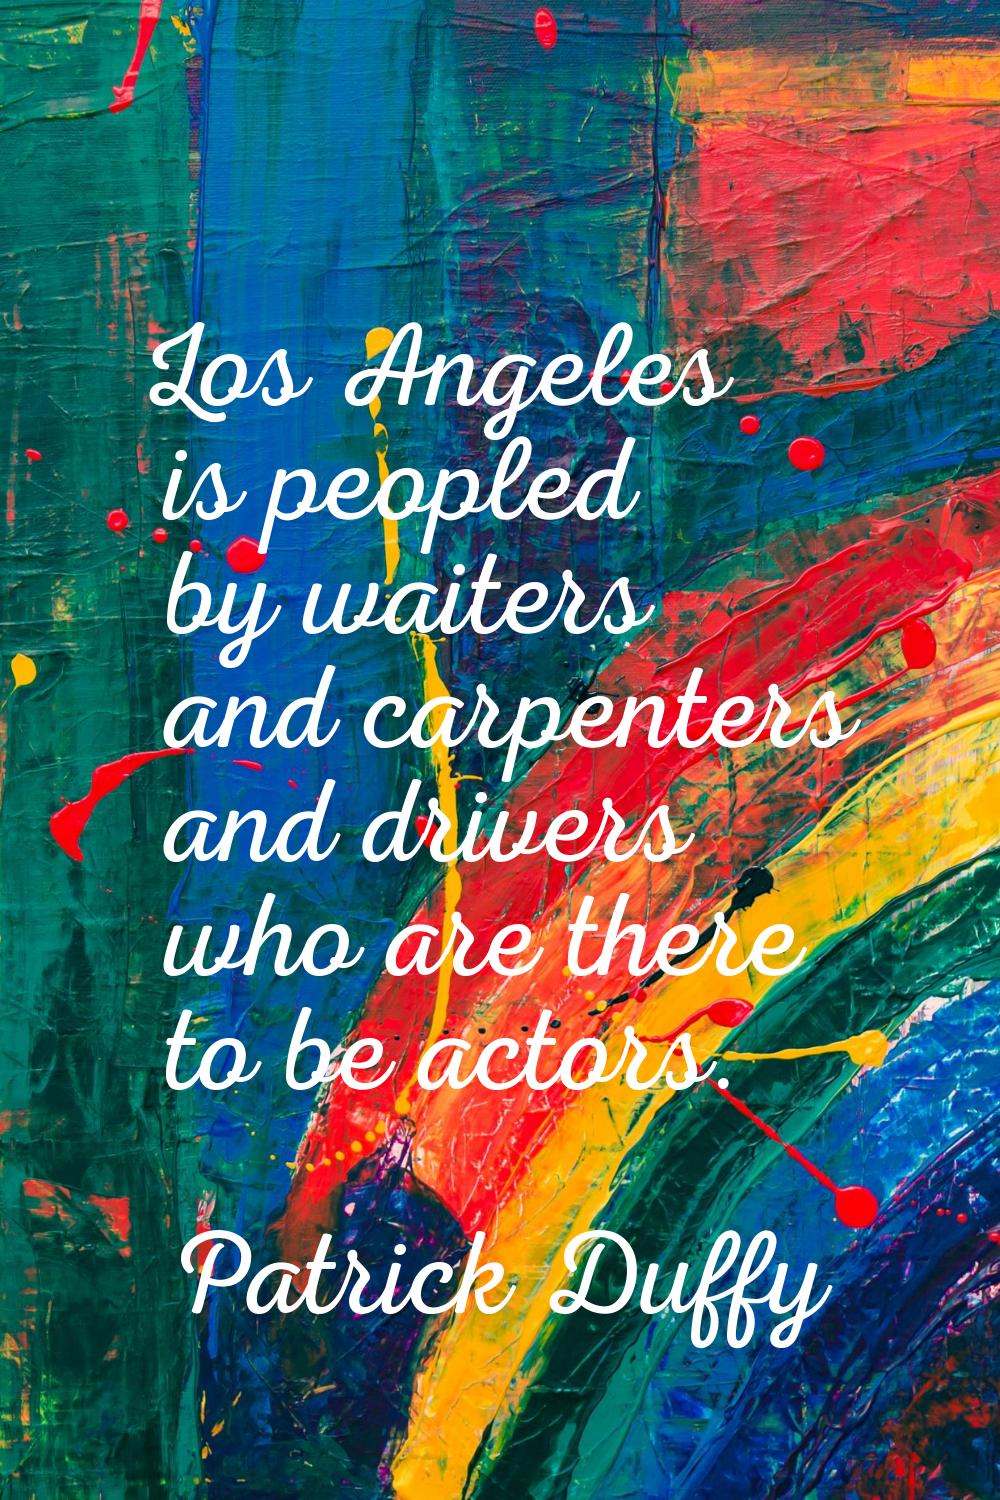 Los Angeles is peopled by waiters and carpenters and drivers who are there to be actors.